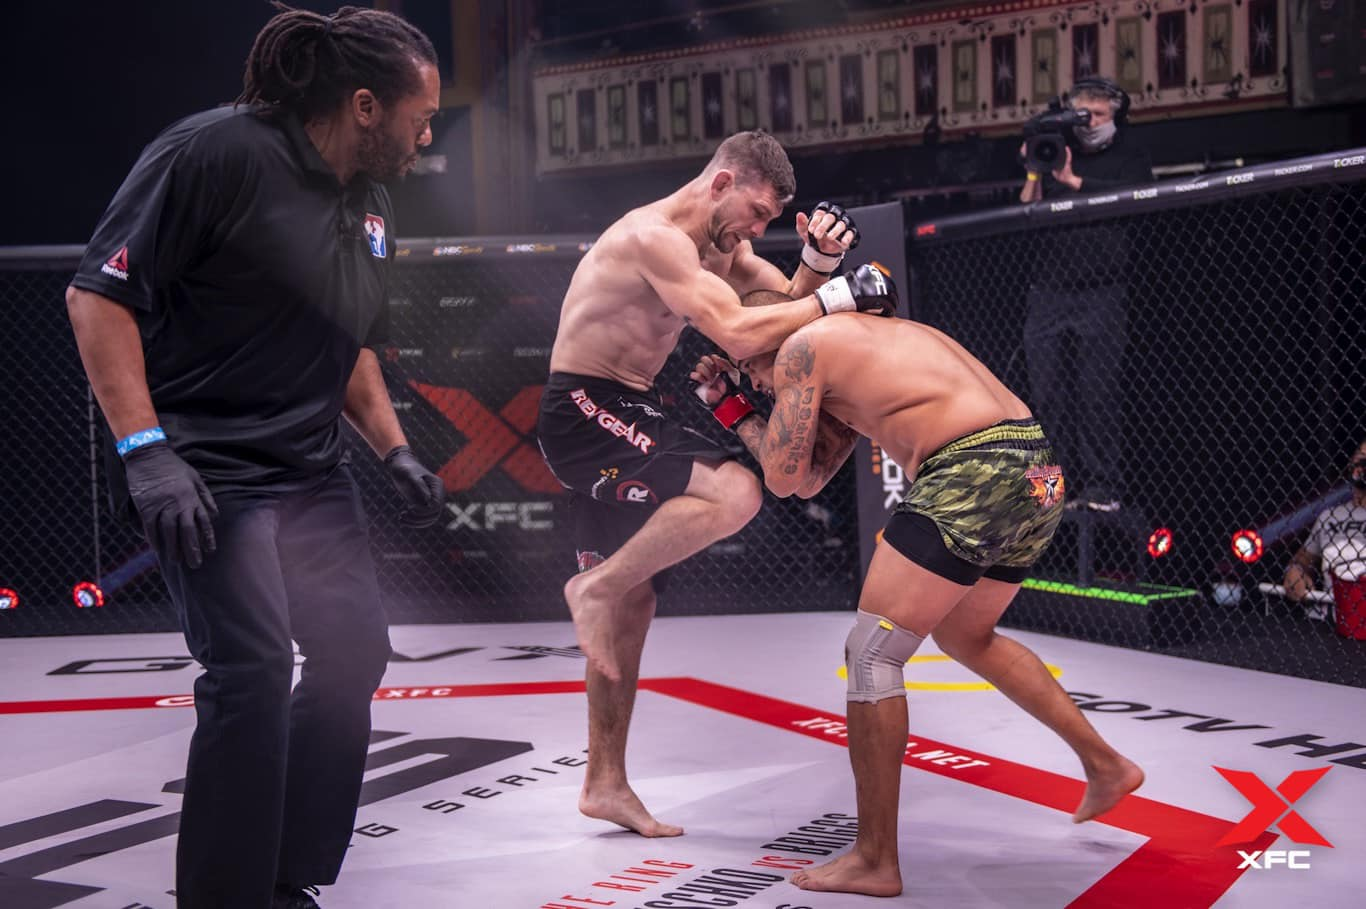 Xtreme Fighting Championships, Inc., Thursday, November 12, 2020, Press release picture